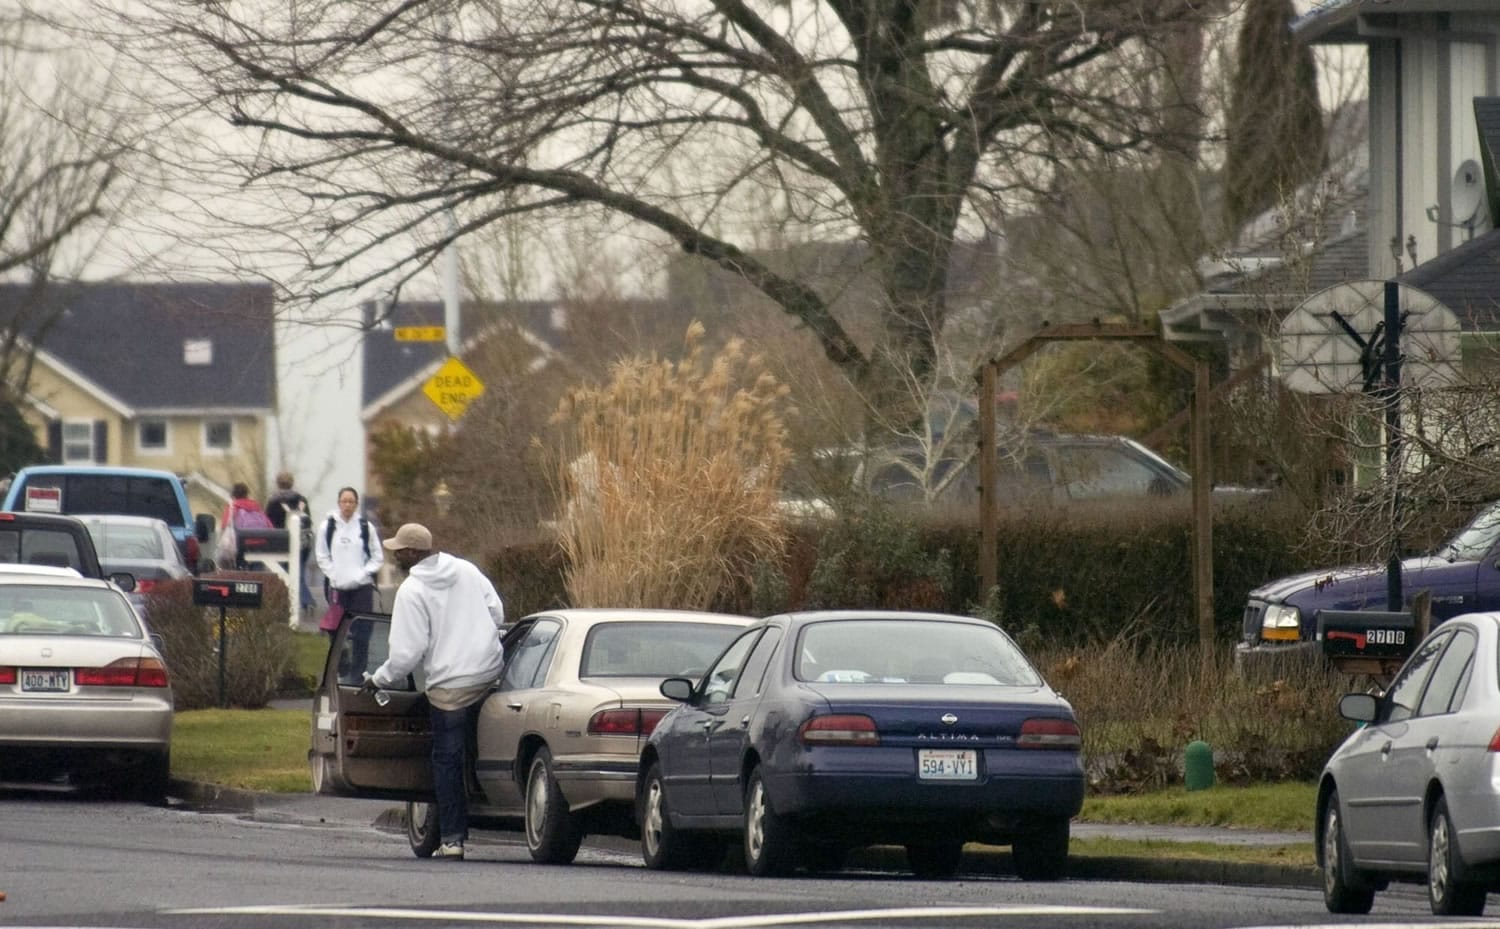 This photograph from 2008 shows how WSU Vancouver students used to park on residential streets rather than paying to park on campus, a trend that generated so many complaints commissioners banned daytime parking on weekdays.